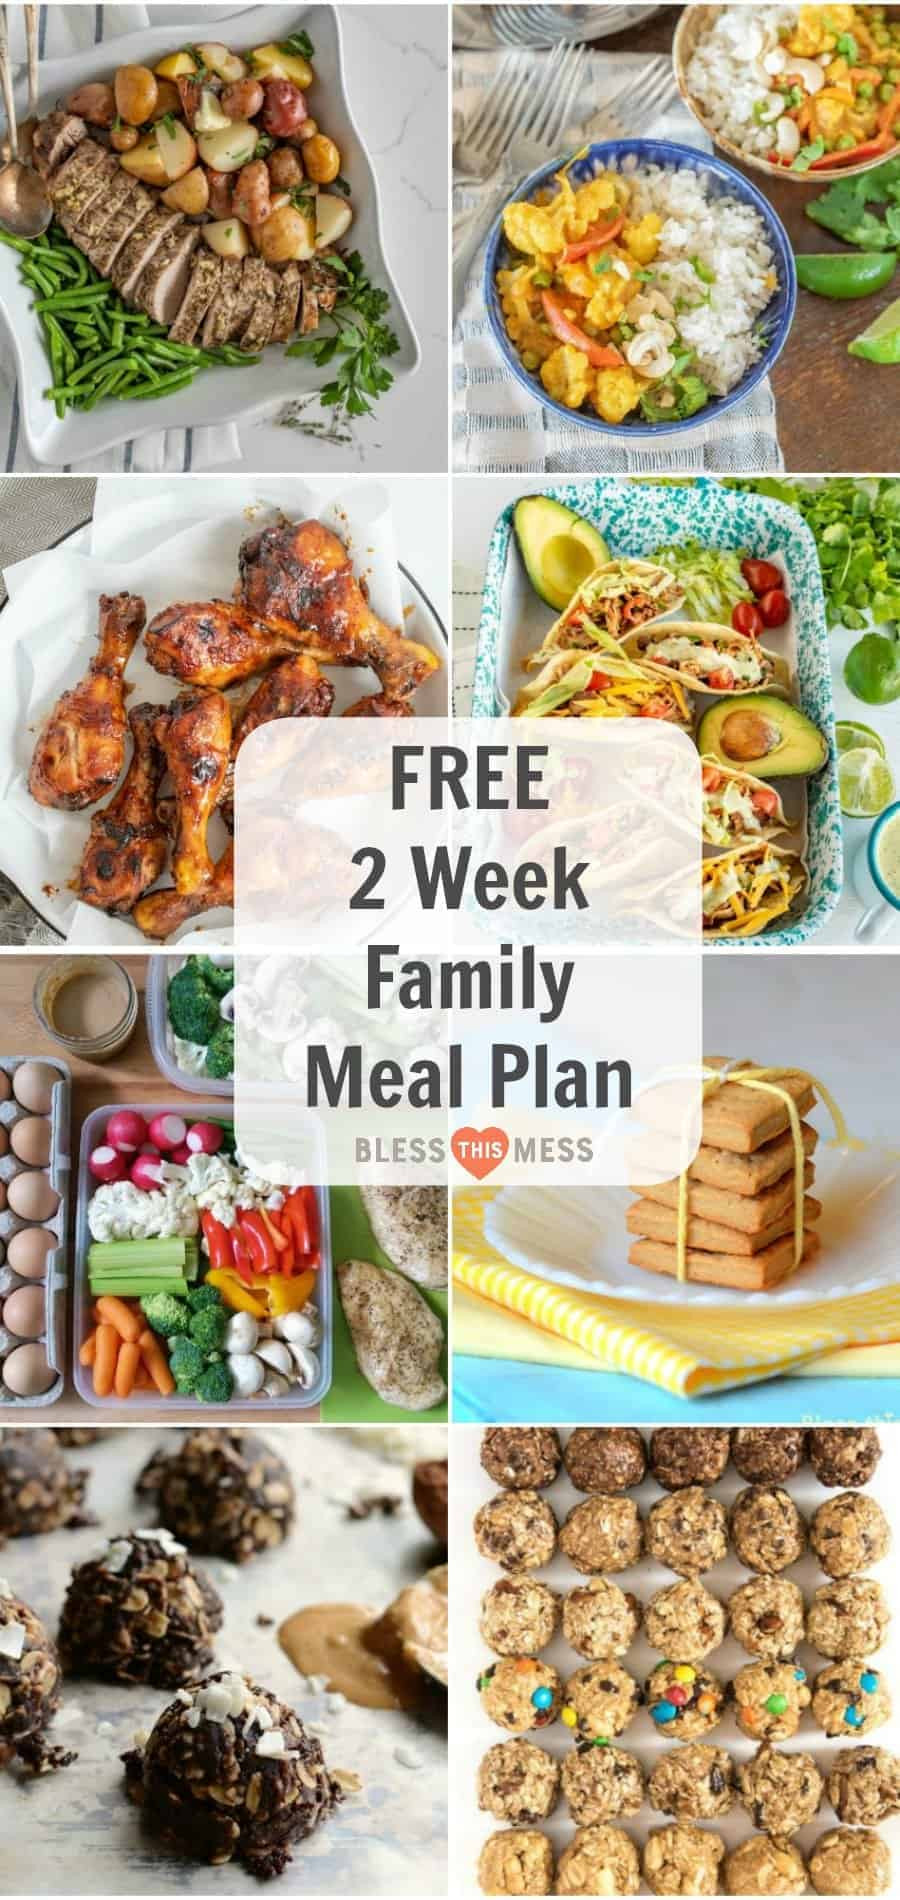 14 Day Clean Eating Meal Plan
 14 Day Clean Eating Meal Plan for the Whole Family